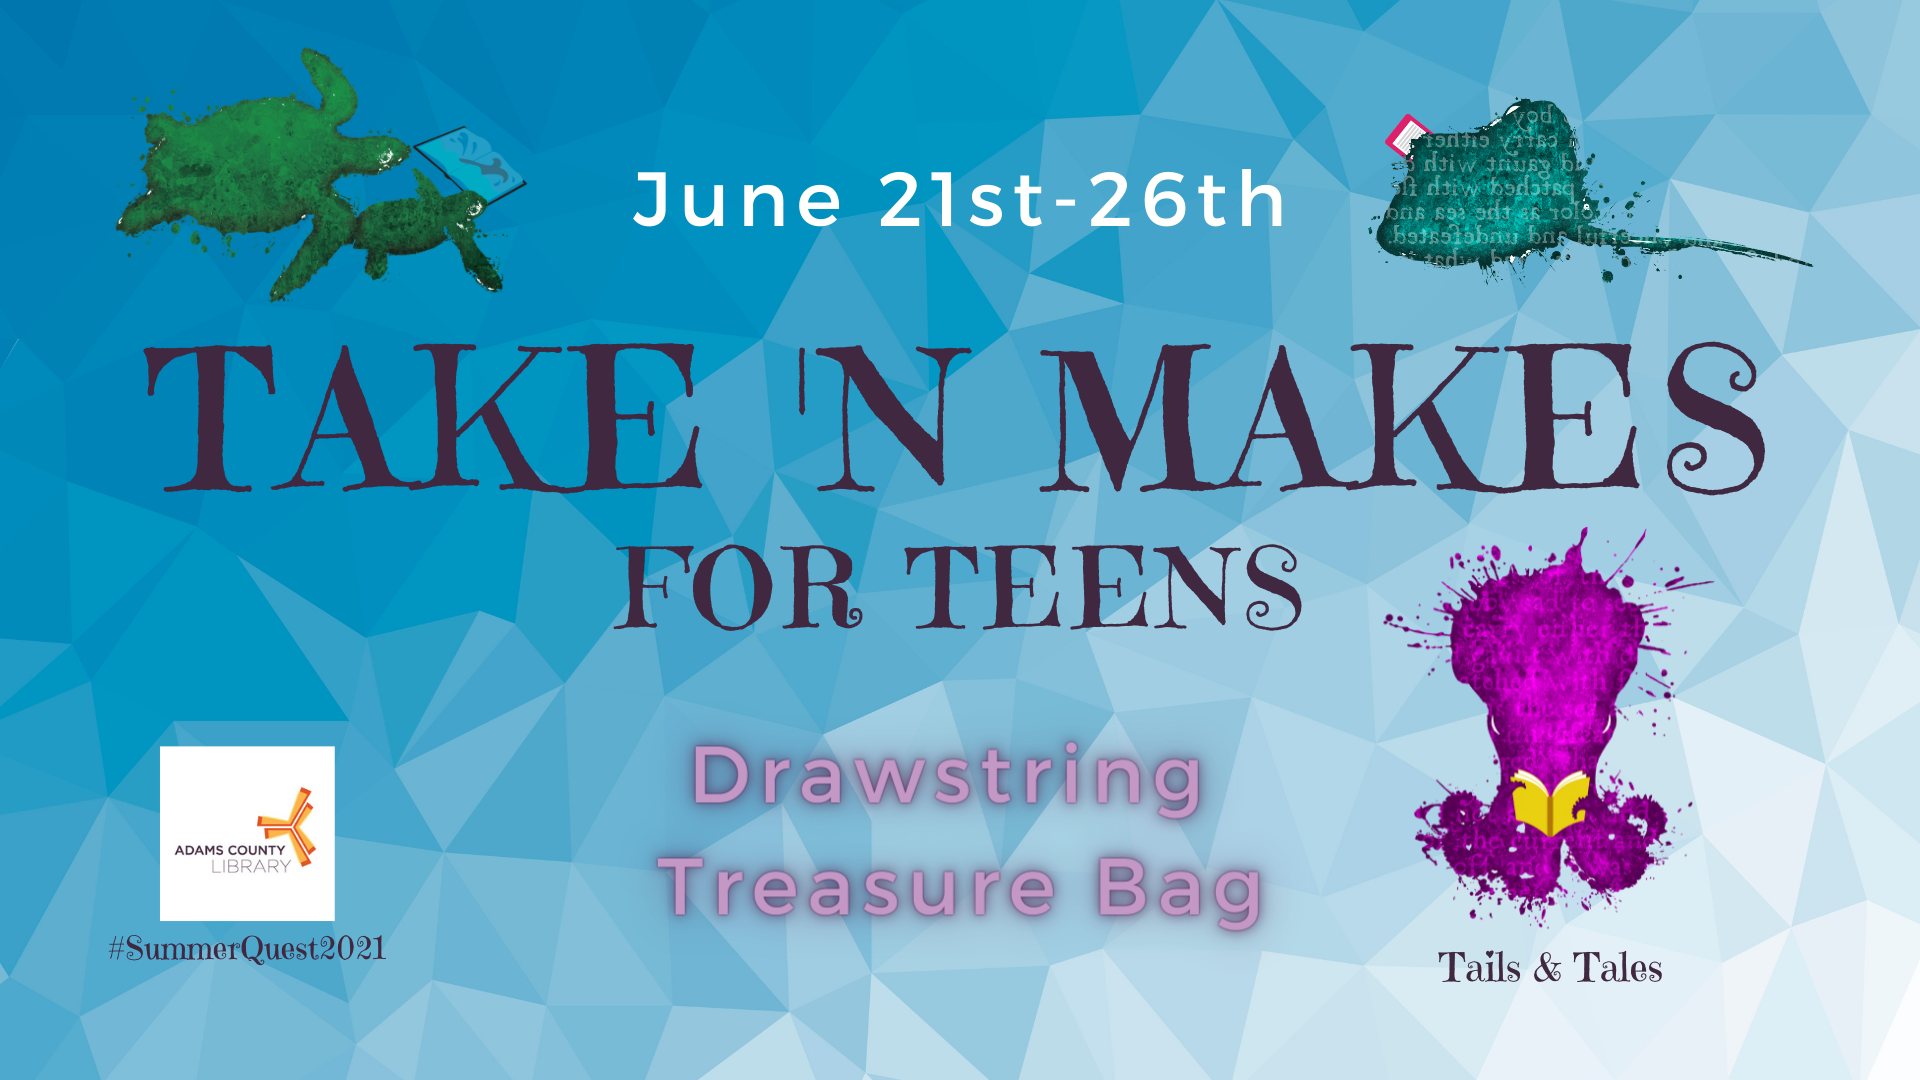 Pick up a Take n' Make for Teens from June 21st through June 26th. This week the project is a Drawstring Treasure Bag!